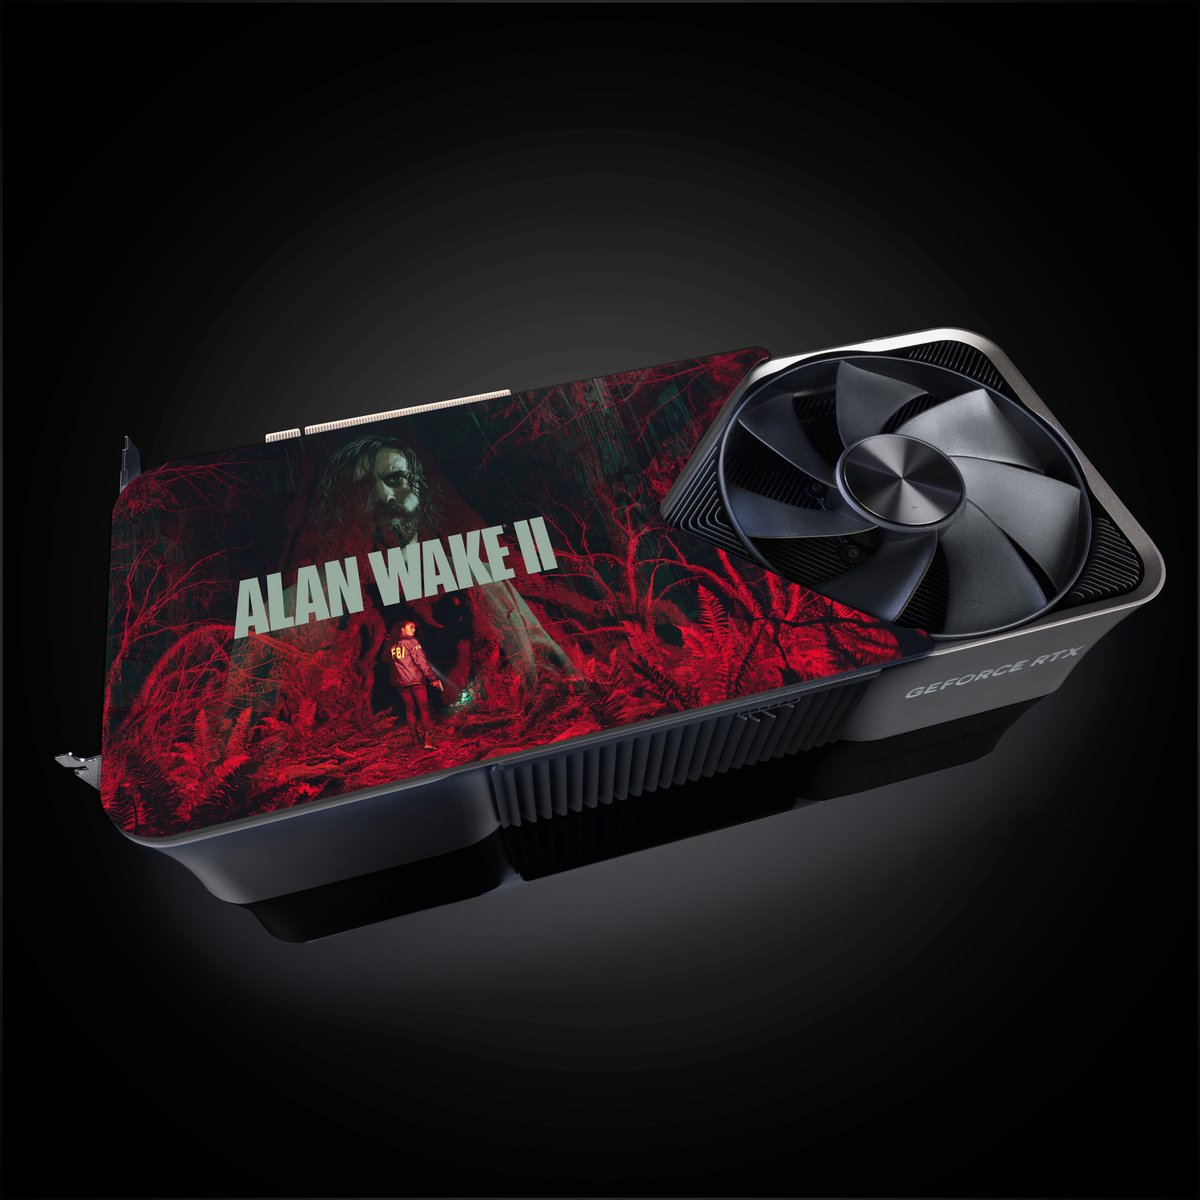 We’re giving away a NVIDIA GeForce RTX 4090 with a one-of-a-kind @AlanWake custom backplate, launching 10/27 with full ray tracing + NVIDIA DLSS 3.5 ⚡

Entering is easy:

🟢 Like this post
🟢 Comment #RTXON